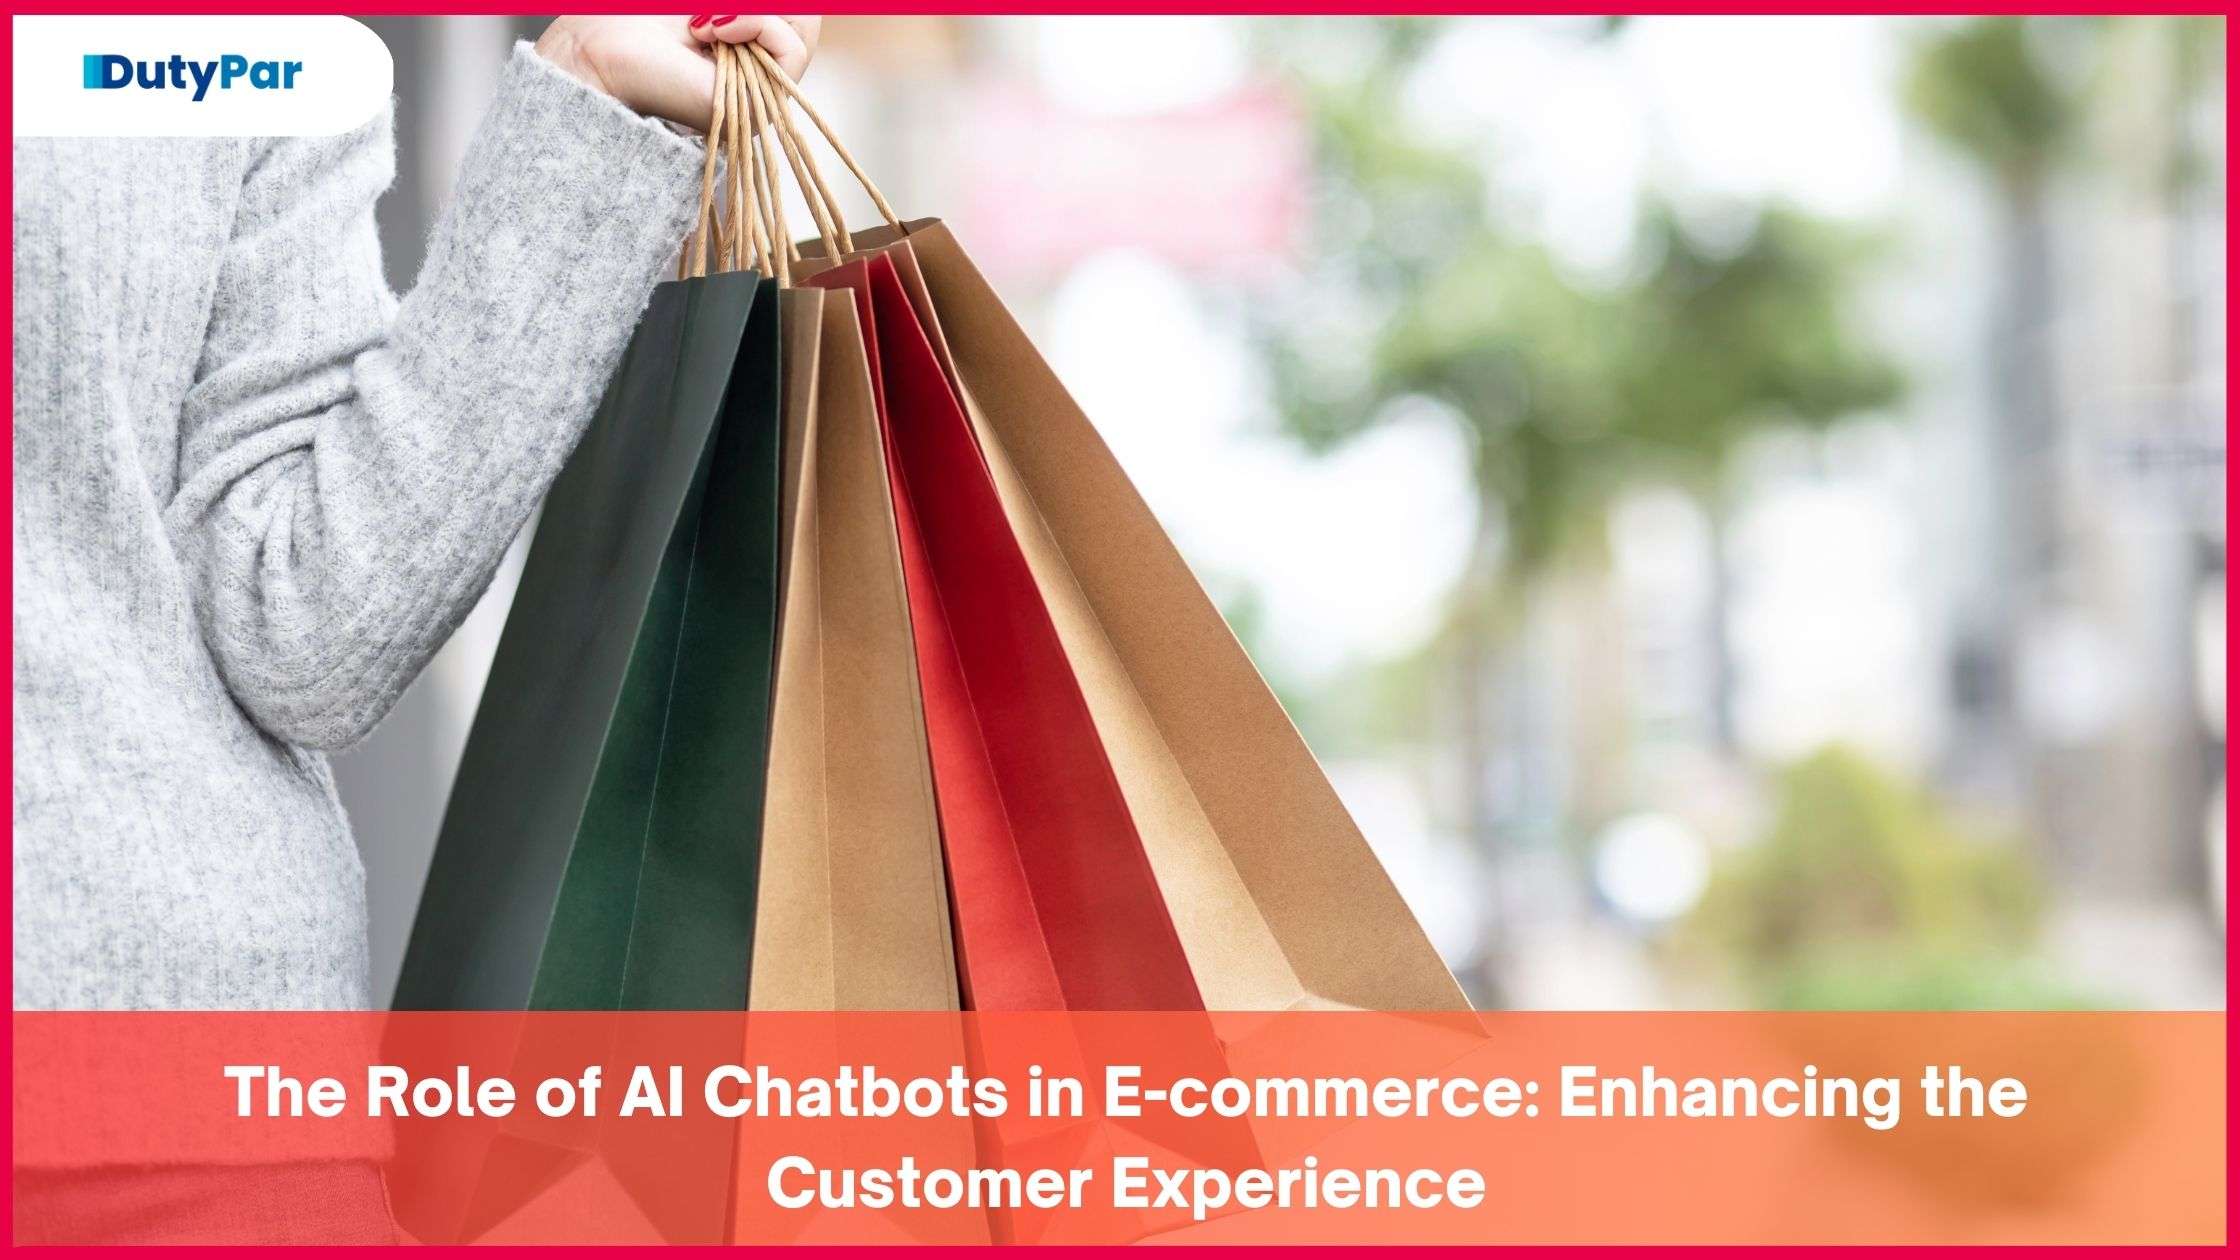 The Role of AI Chatbots in E-commerce: Enhancing the Customer Experience